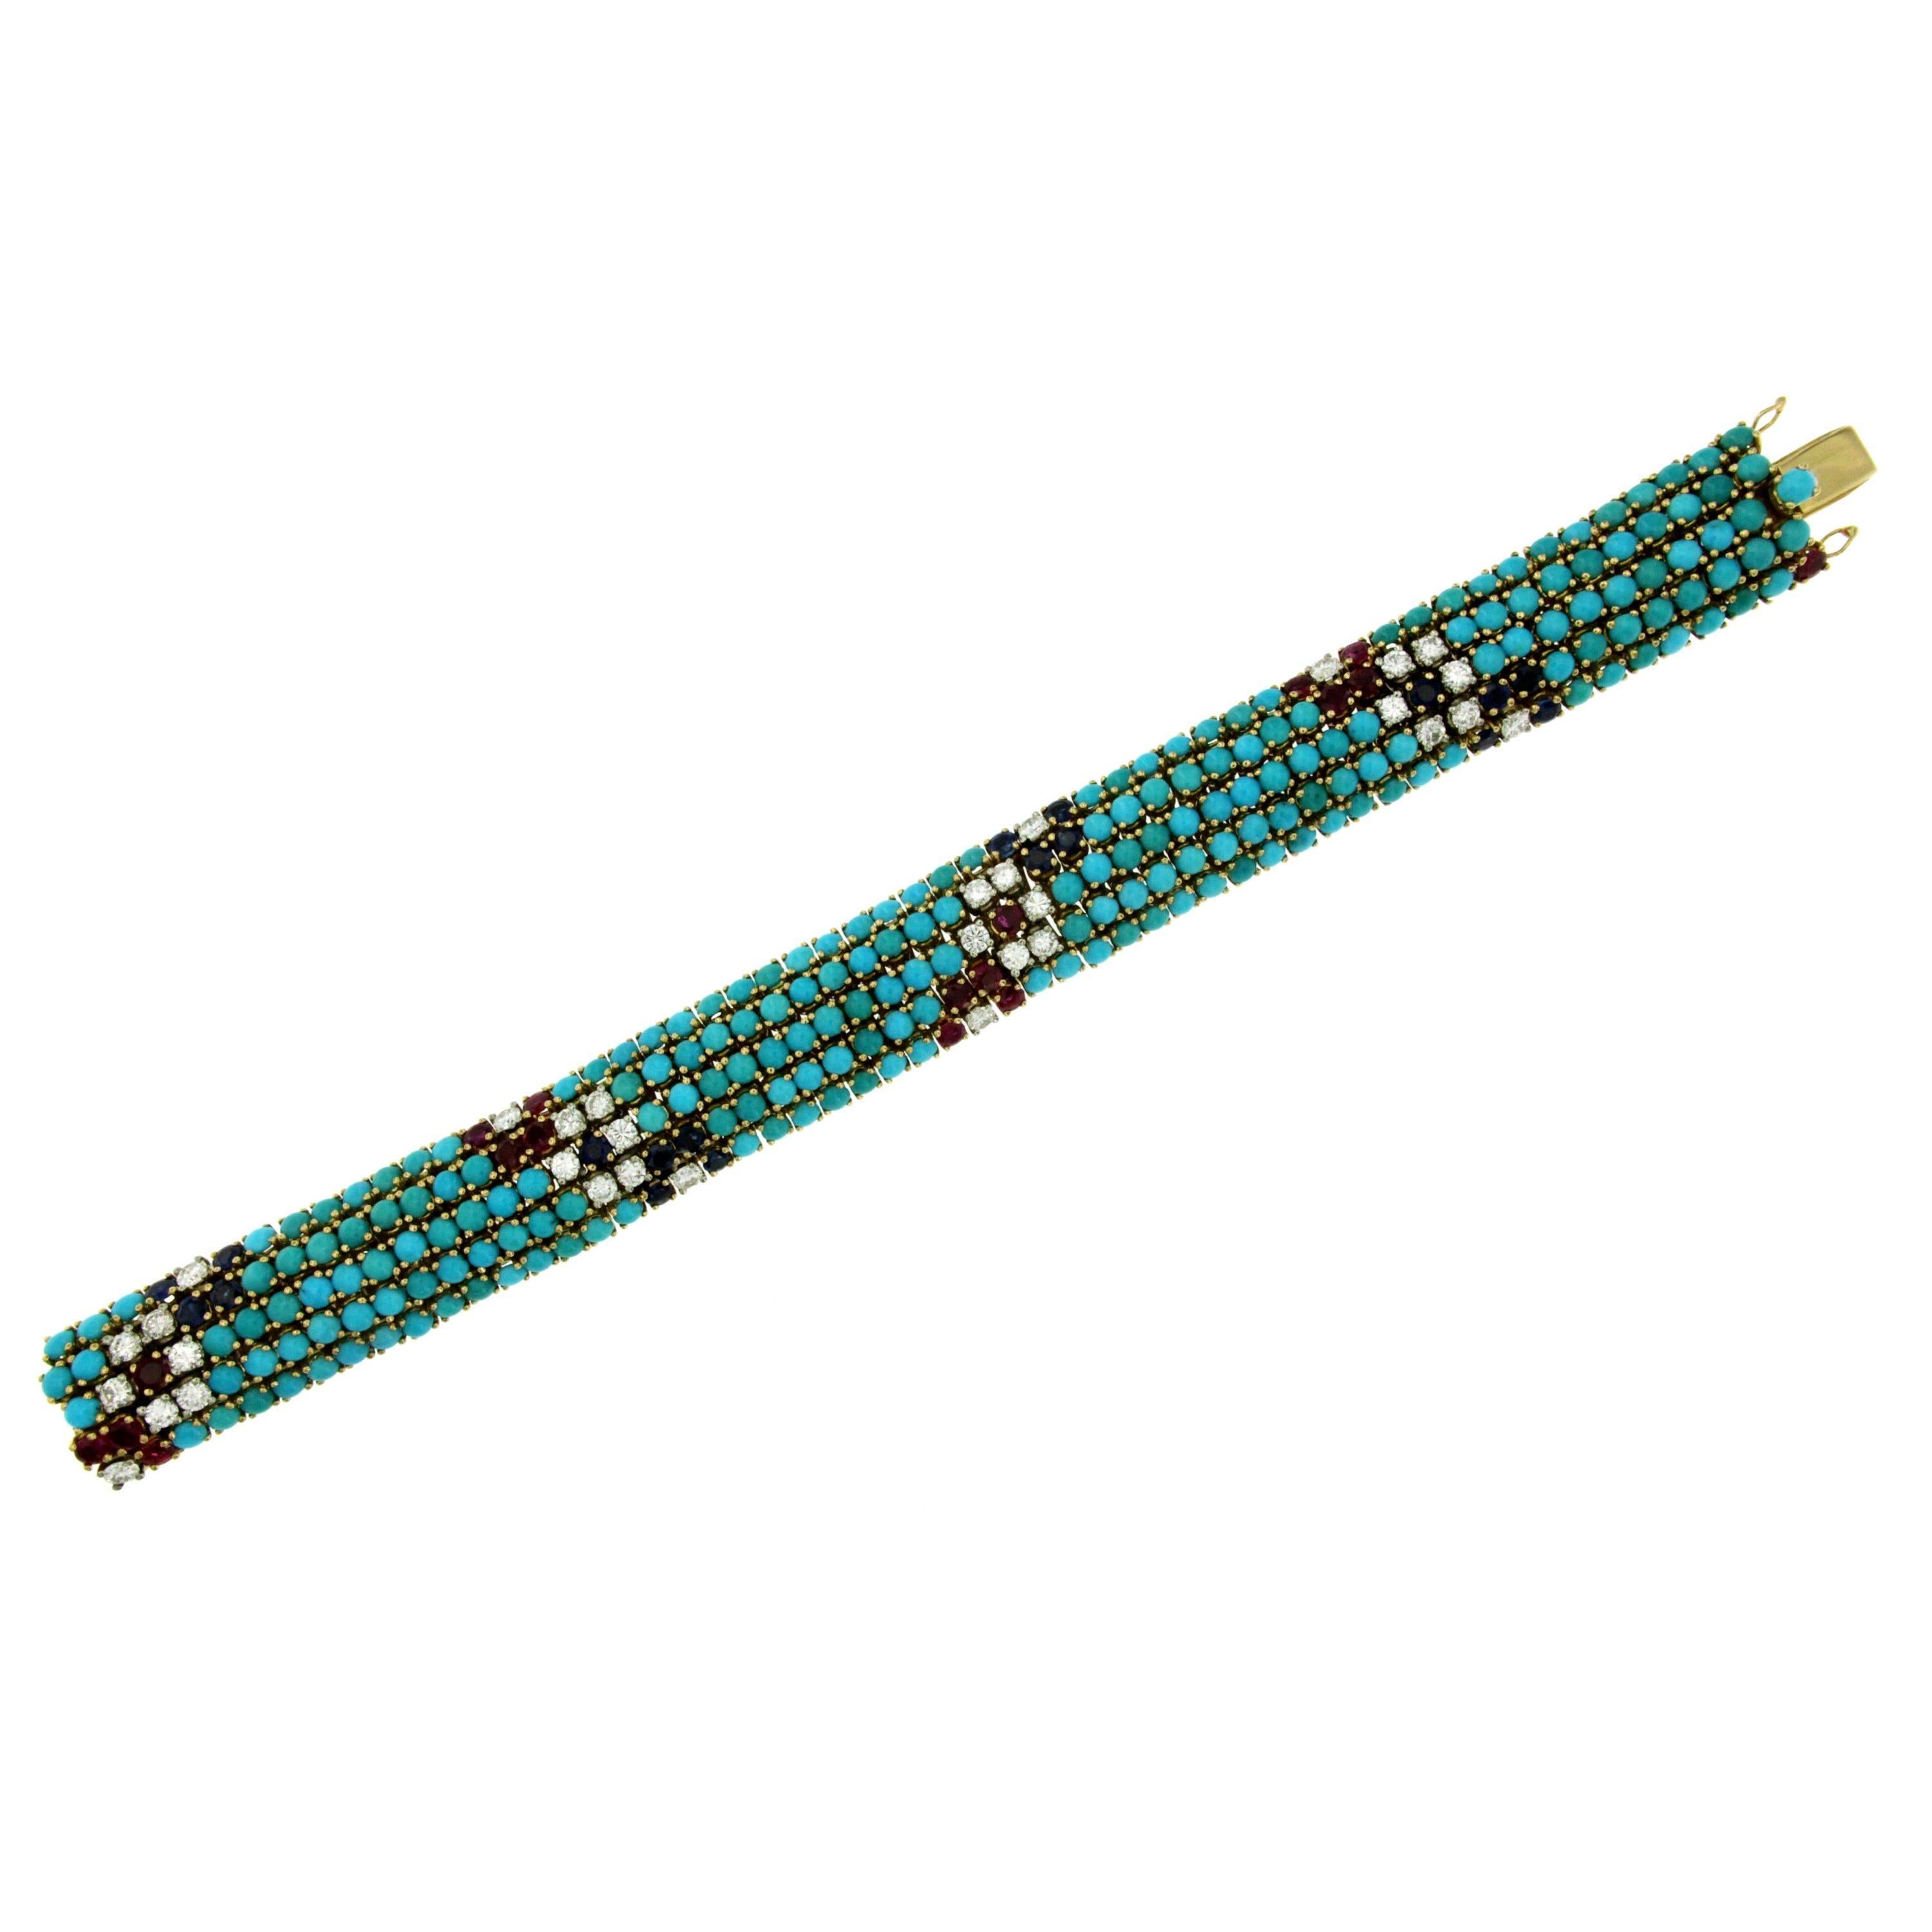 Made of 18k yellow gold this unusual vintage bracelet is set with natural turquoise cabochons, prong-set and mixed with natural sapphire, rubies and diamonds weighing 3.20 total carats G color Vvs clarity.
It is extremely flexible. Finished with a